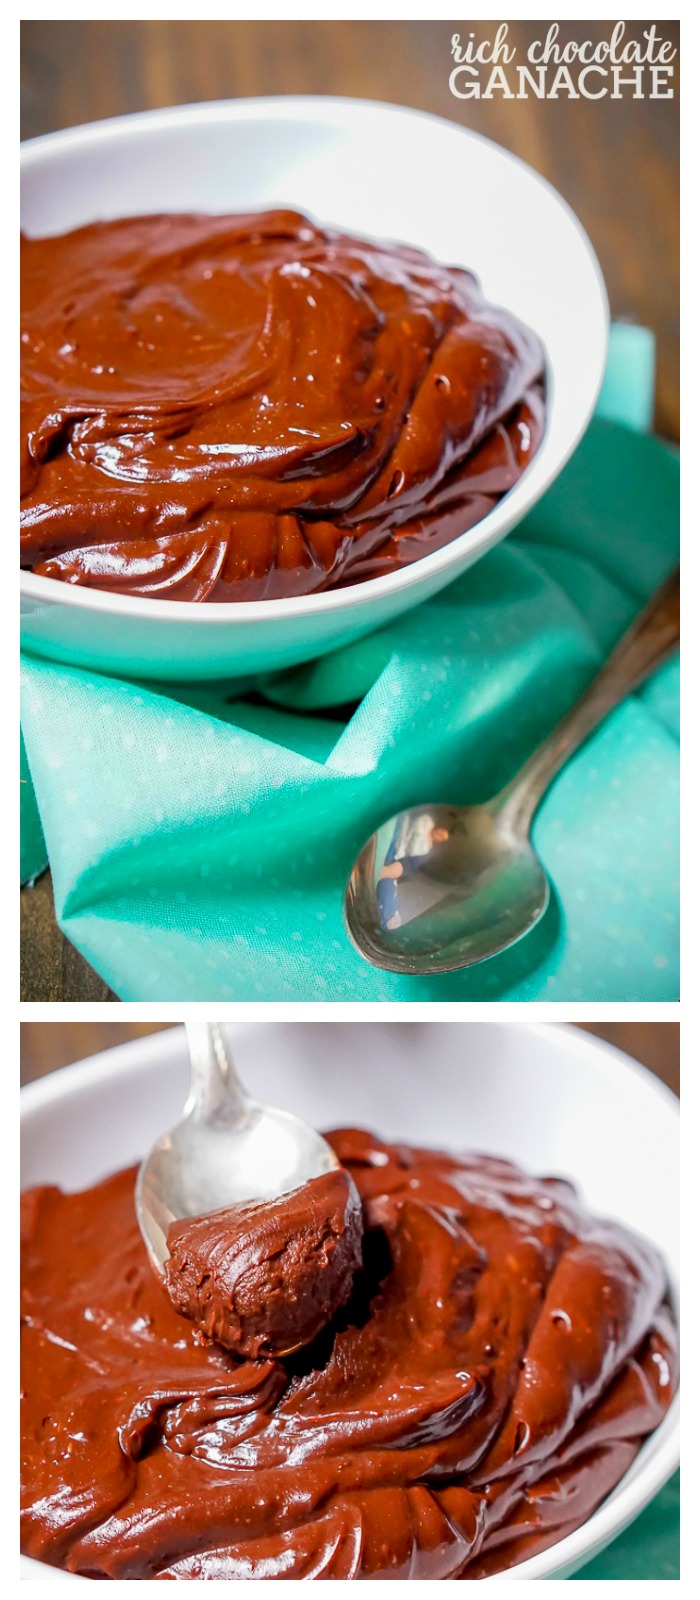 Rich Chocolate Ganache is an incredibly versatile dessert recipe - as glazes, dipped topping on pastries, filling in cookie cups, layers of a cake, etc. Come see just how easy it is to make! | The Love Nerds